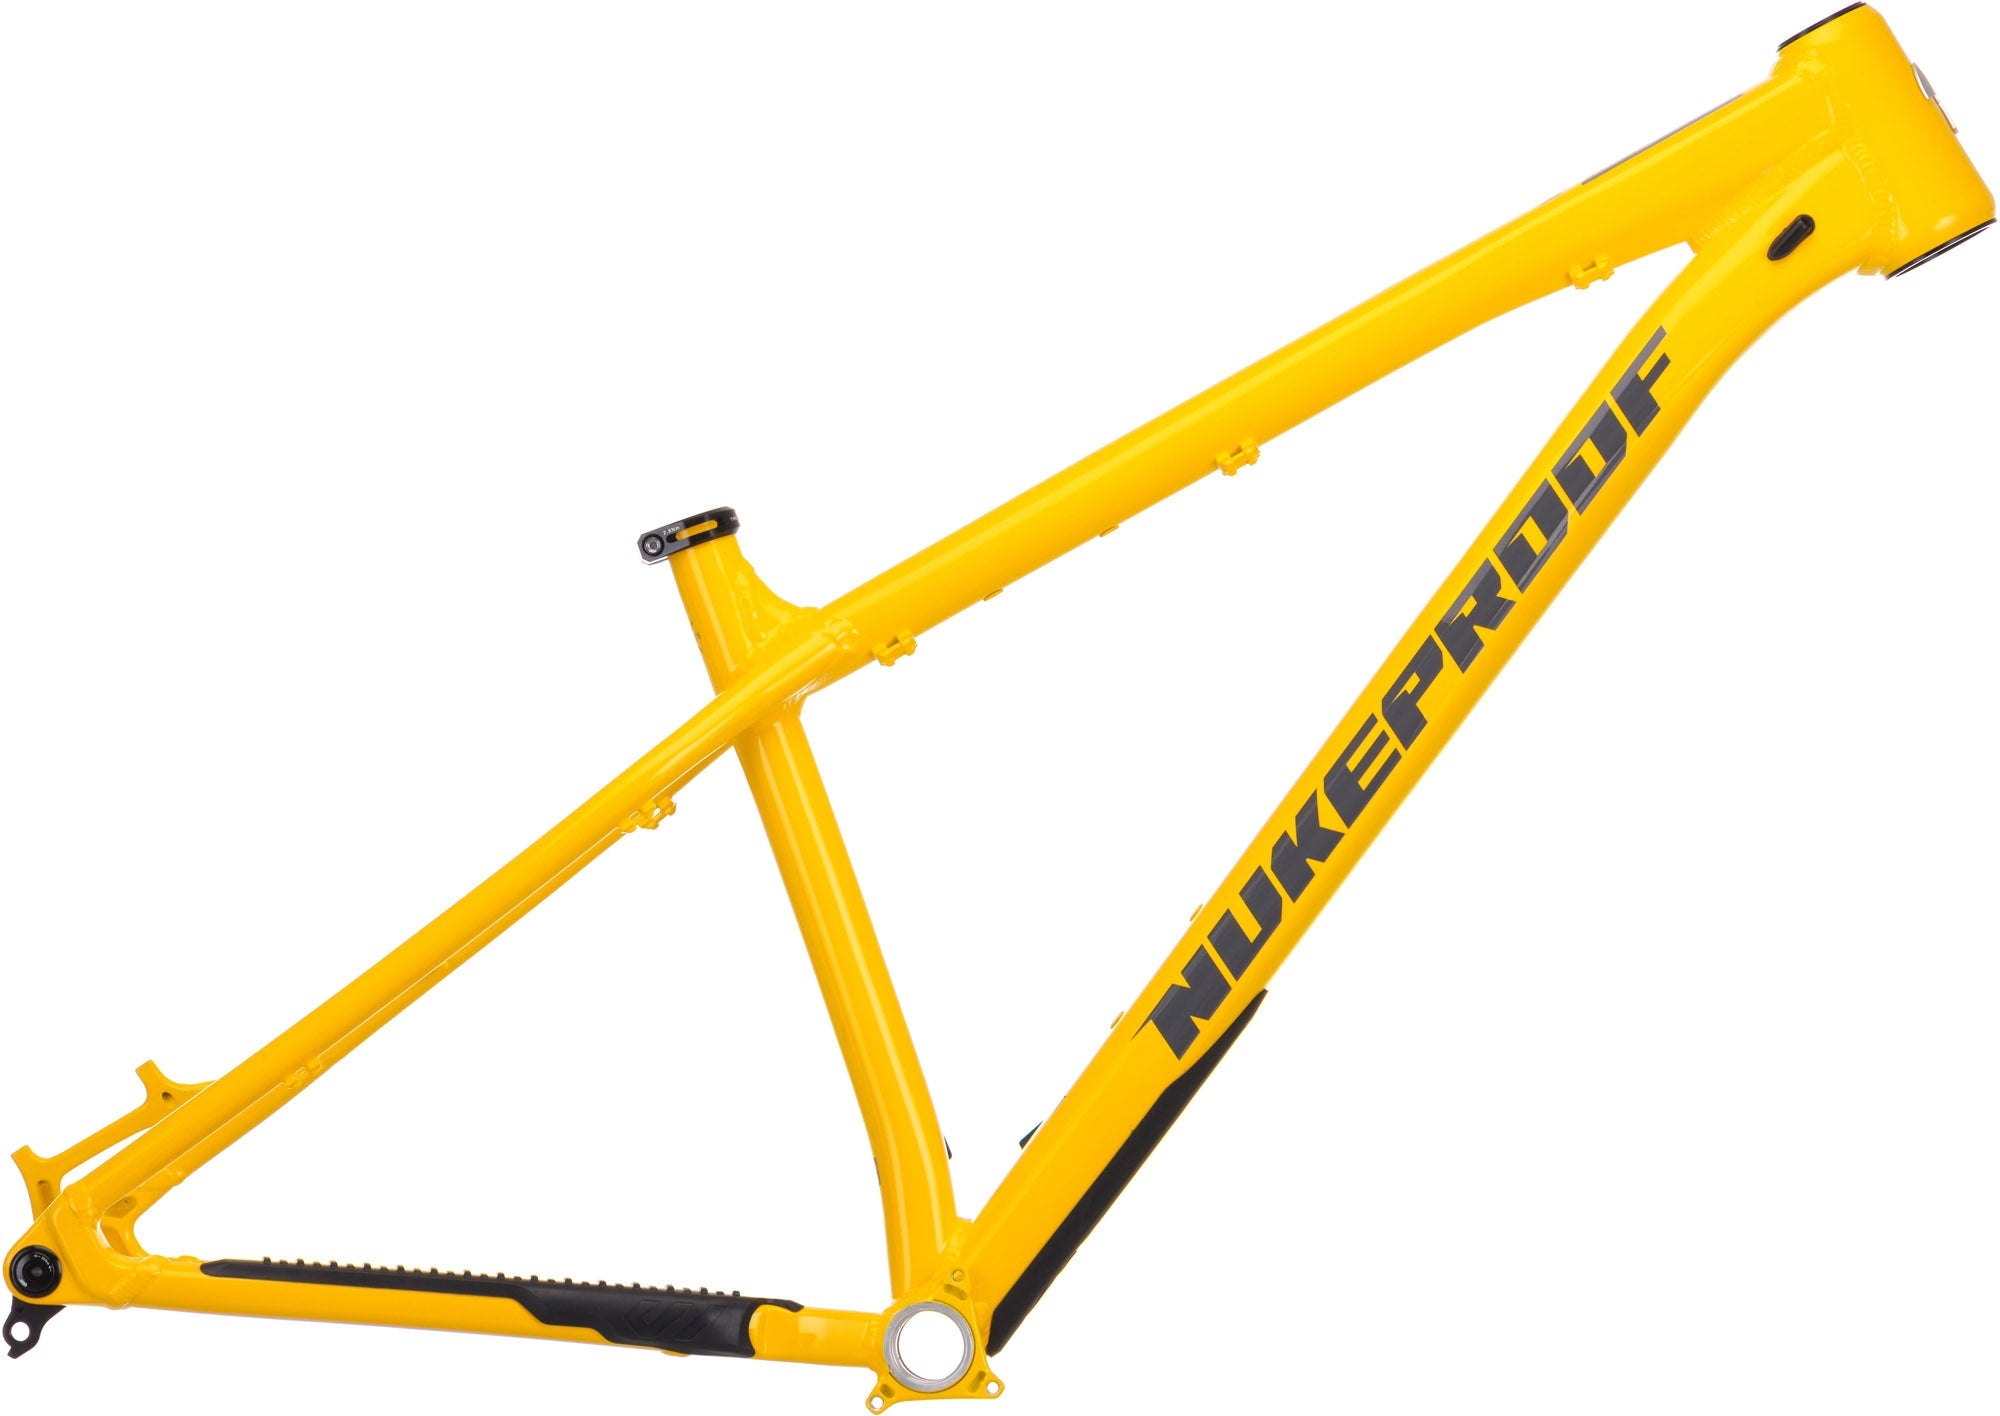 Nukeproof Scout 275 Frame 2023